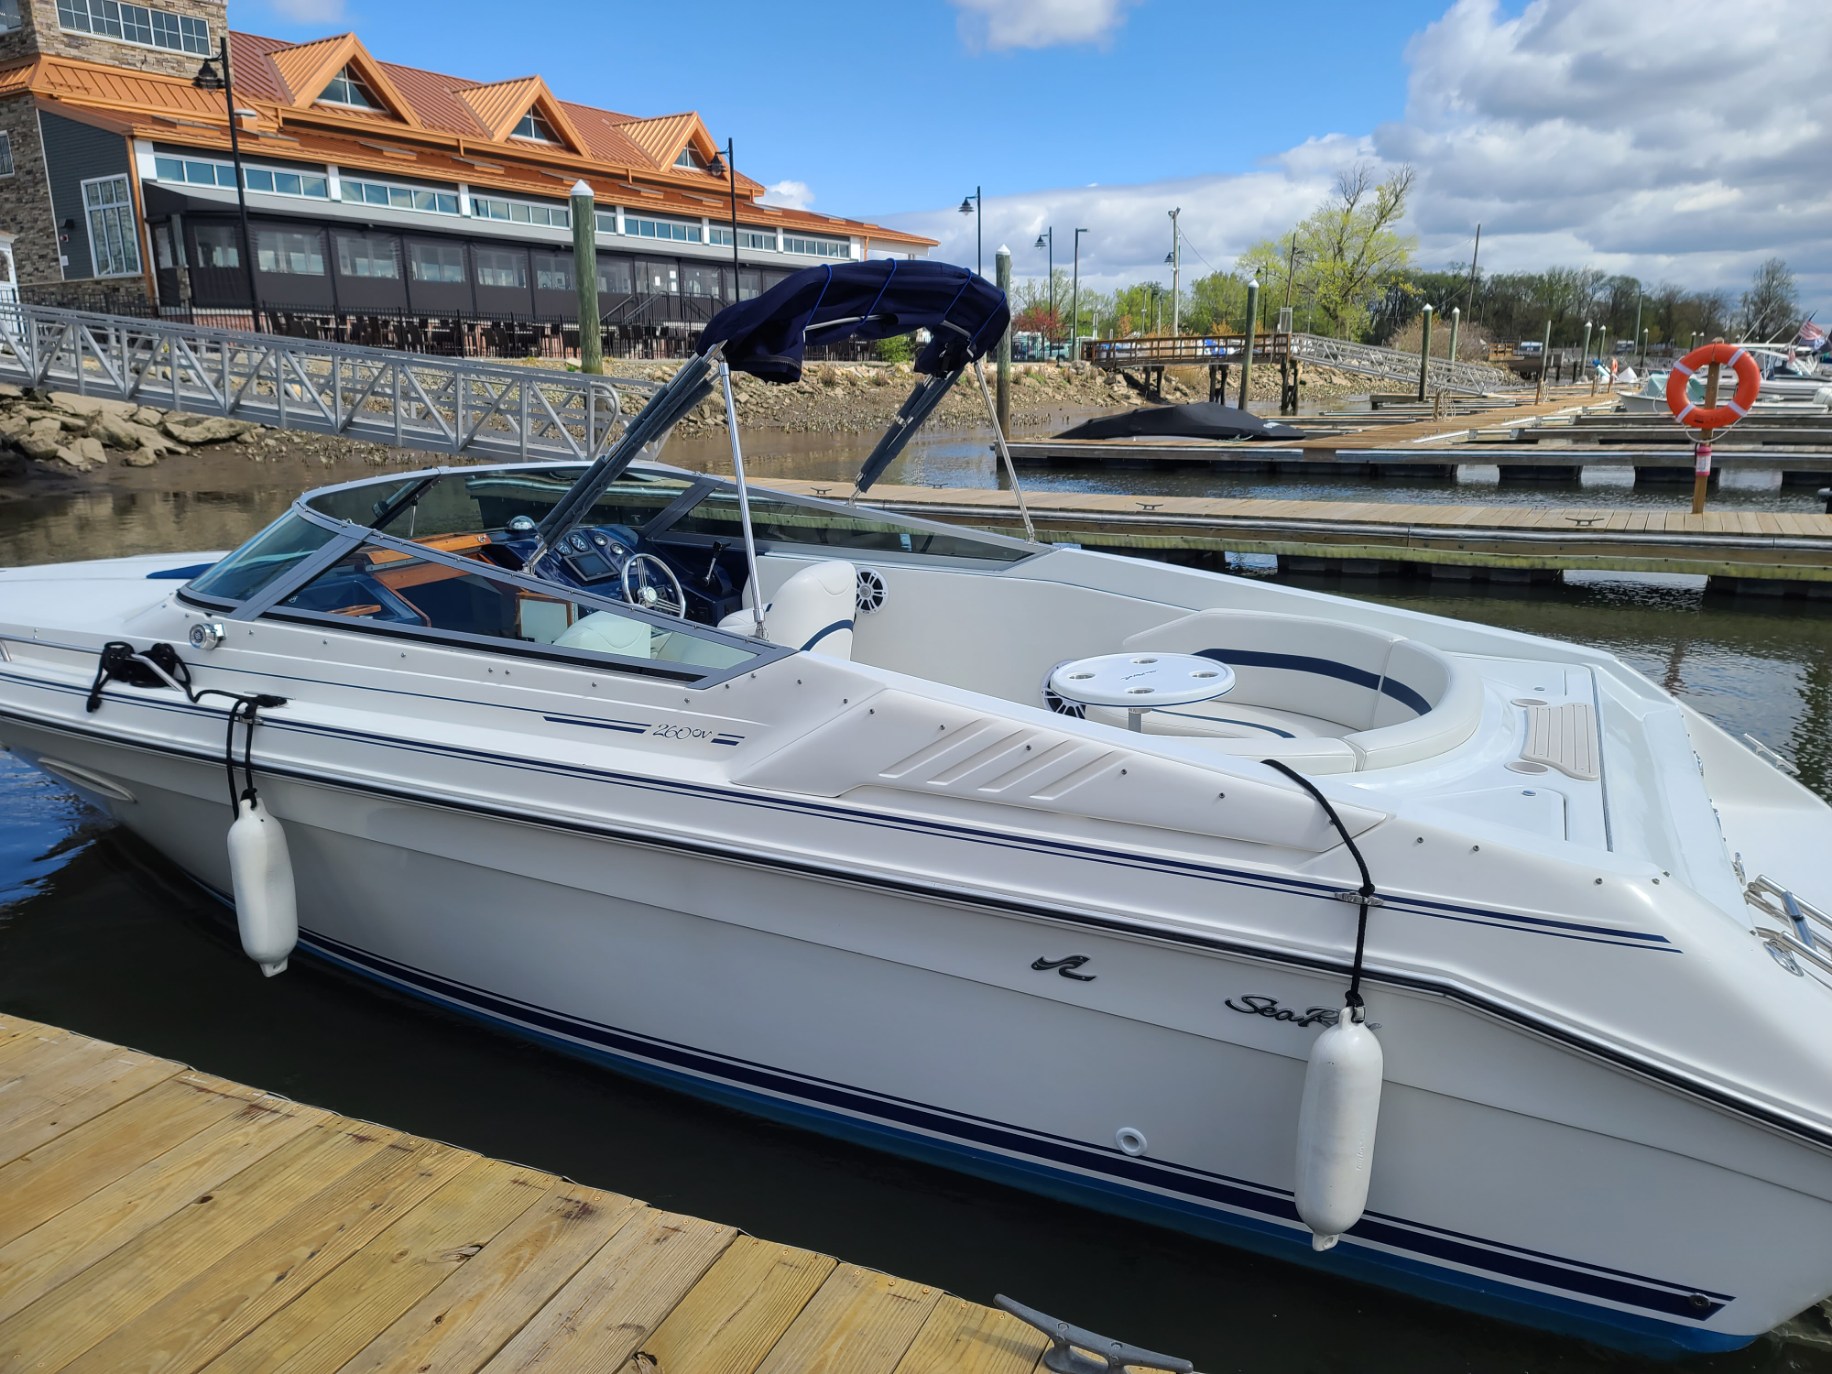 1990 Sea Ray 260 overnighter  Power boat for sale in Rutledge, PA - image 19 